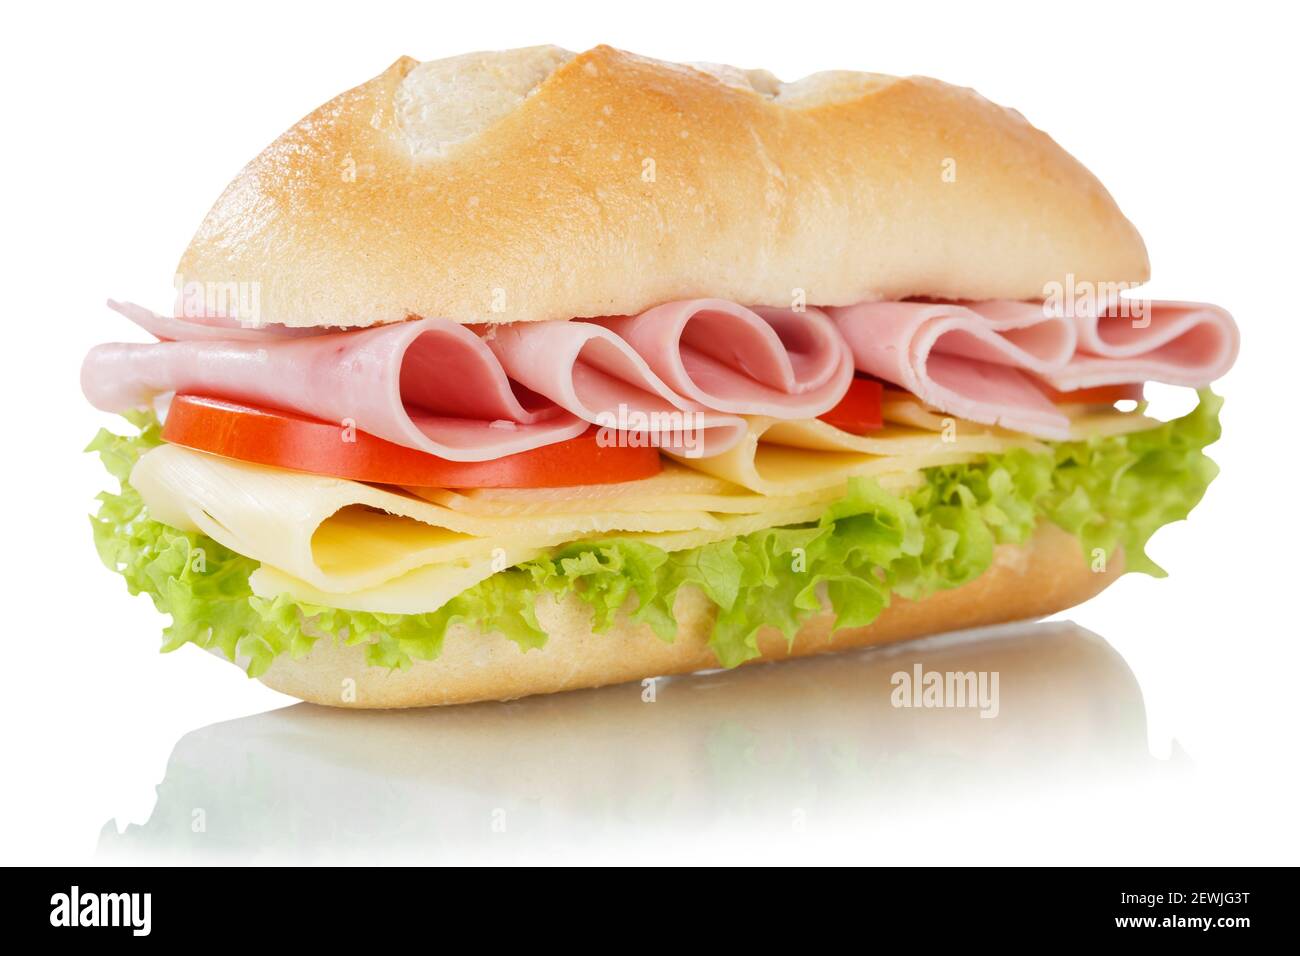 Sub sandwich with ham and cheese isolated on a white background. Stock Photo